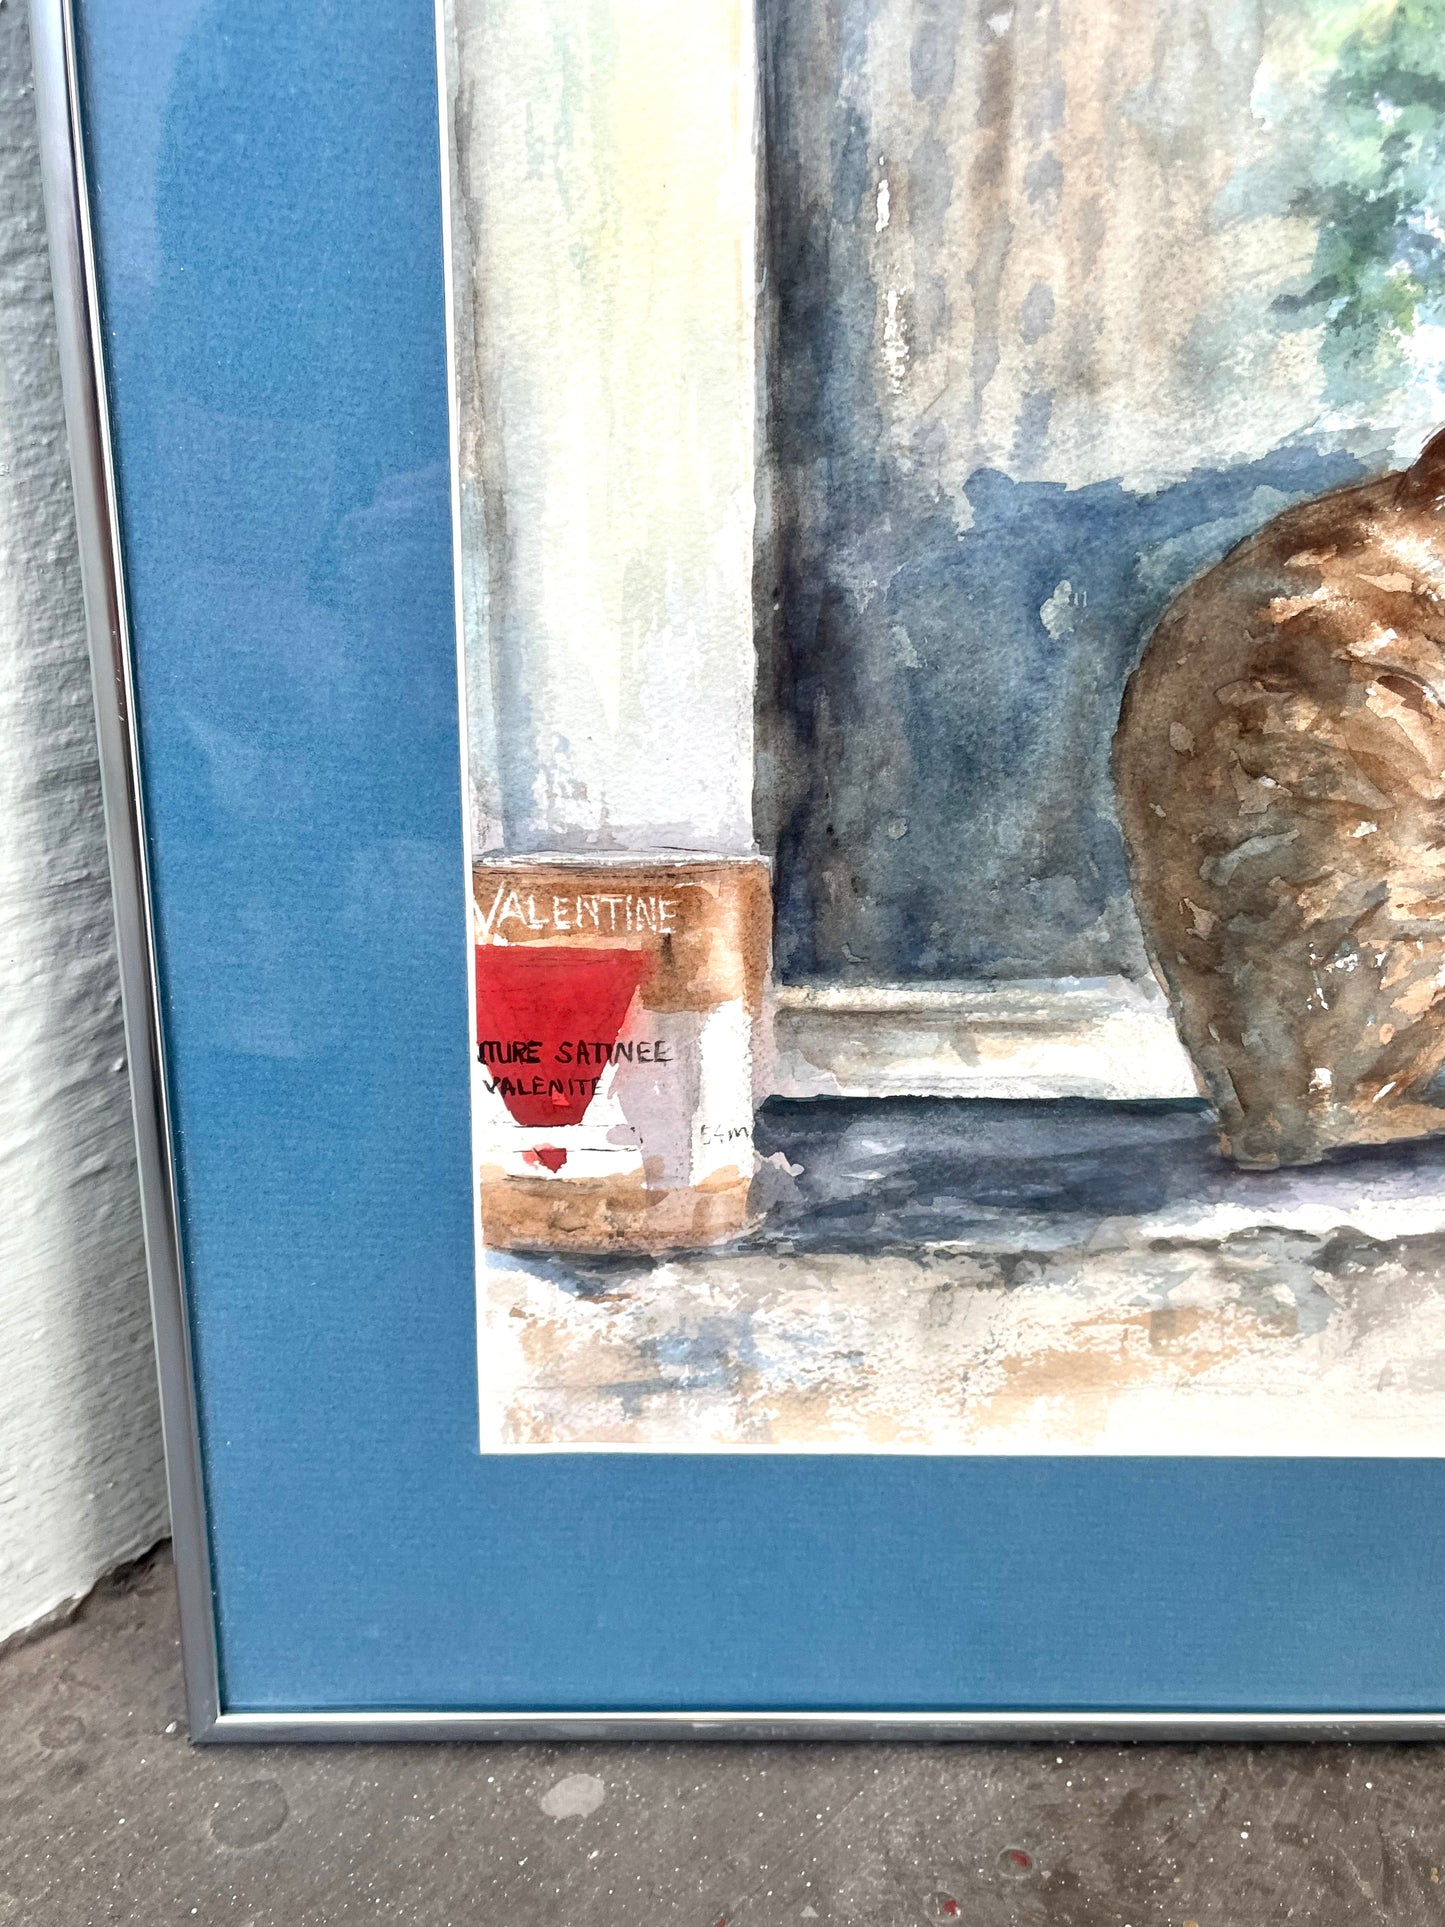 Framed and Signed Cat in Windowsill Watercolor